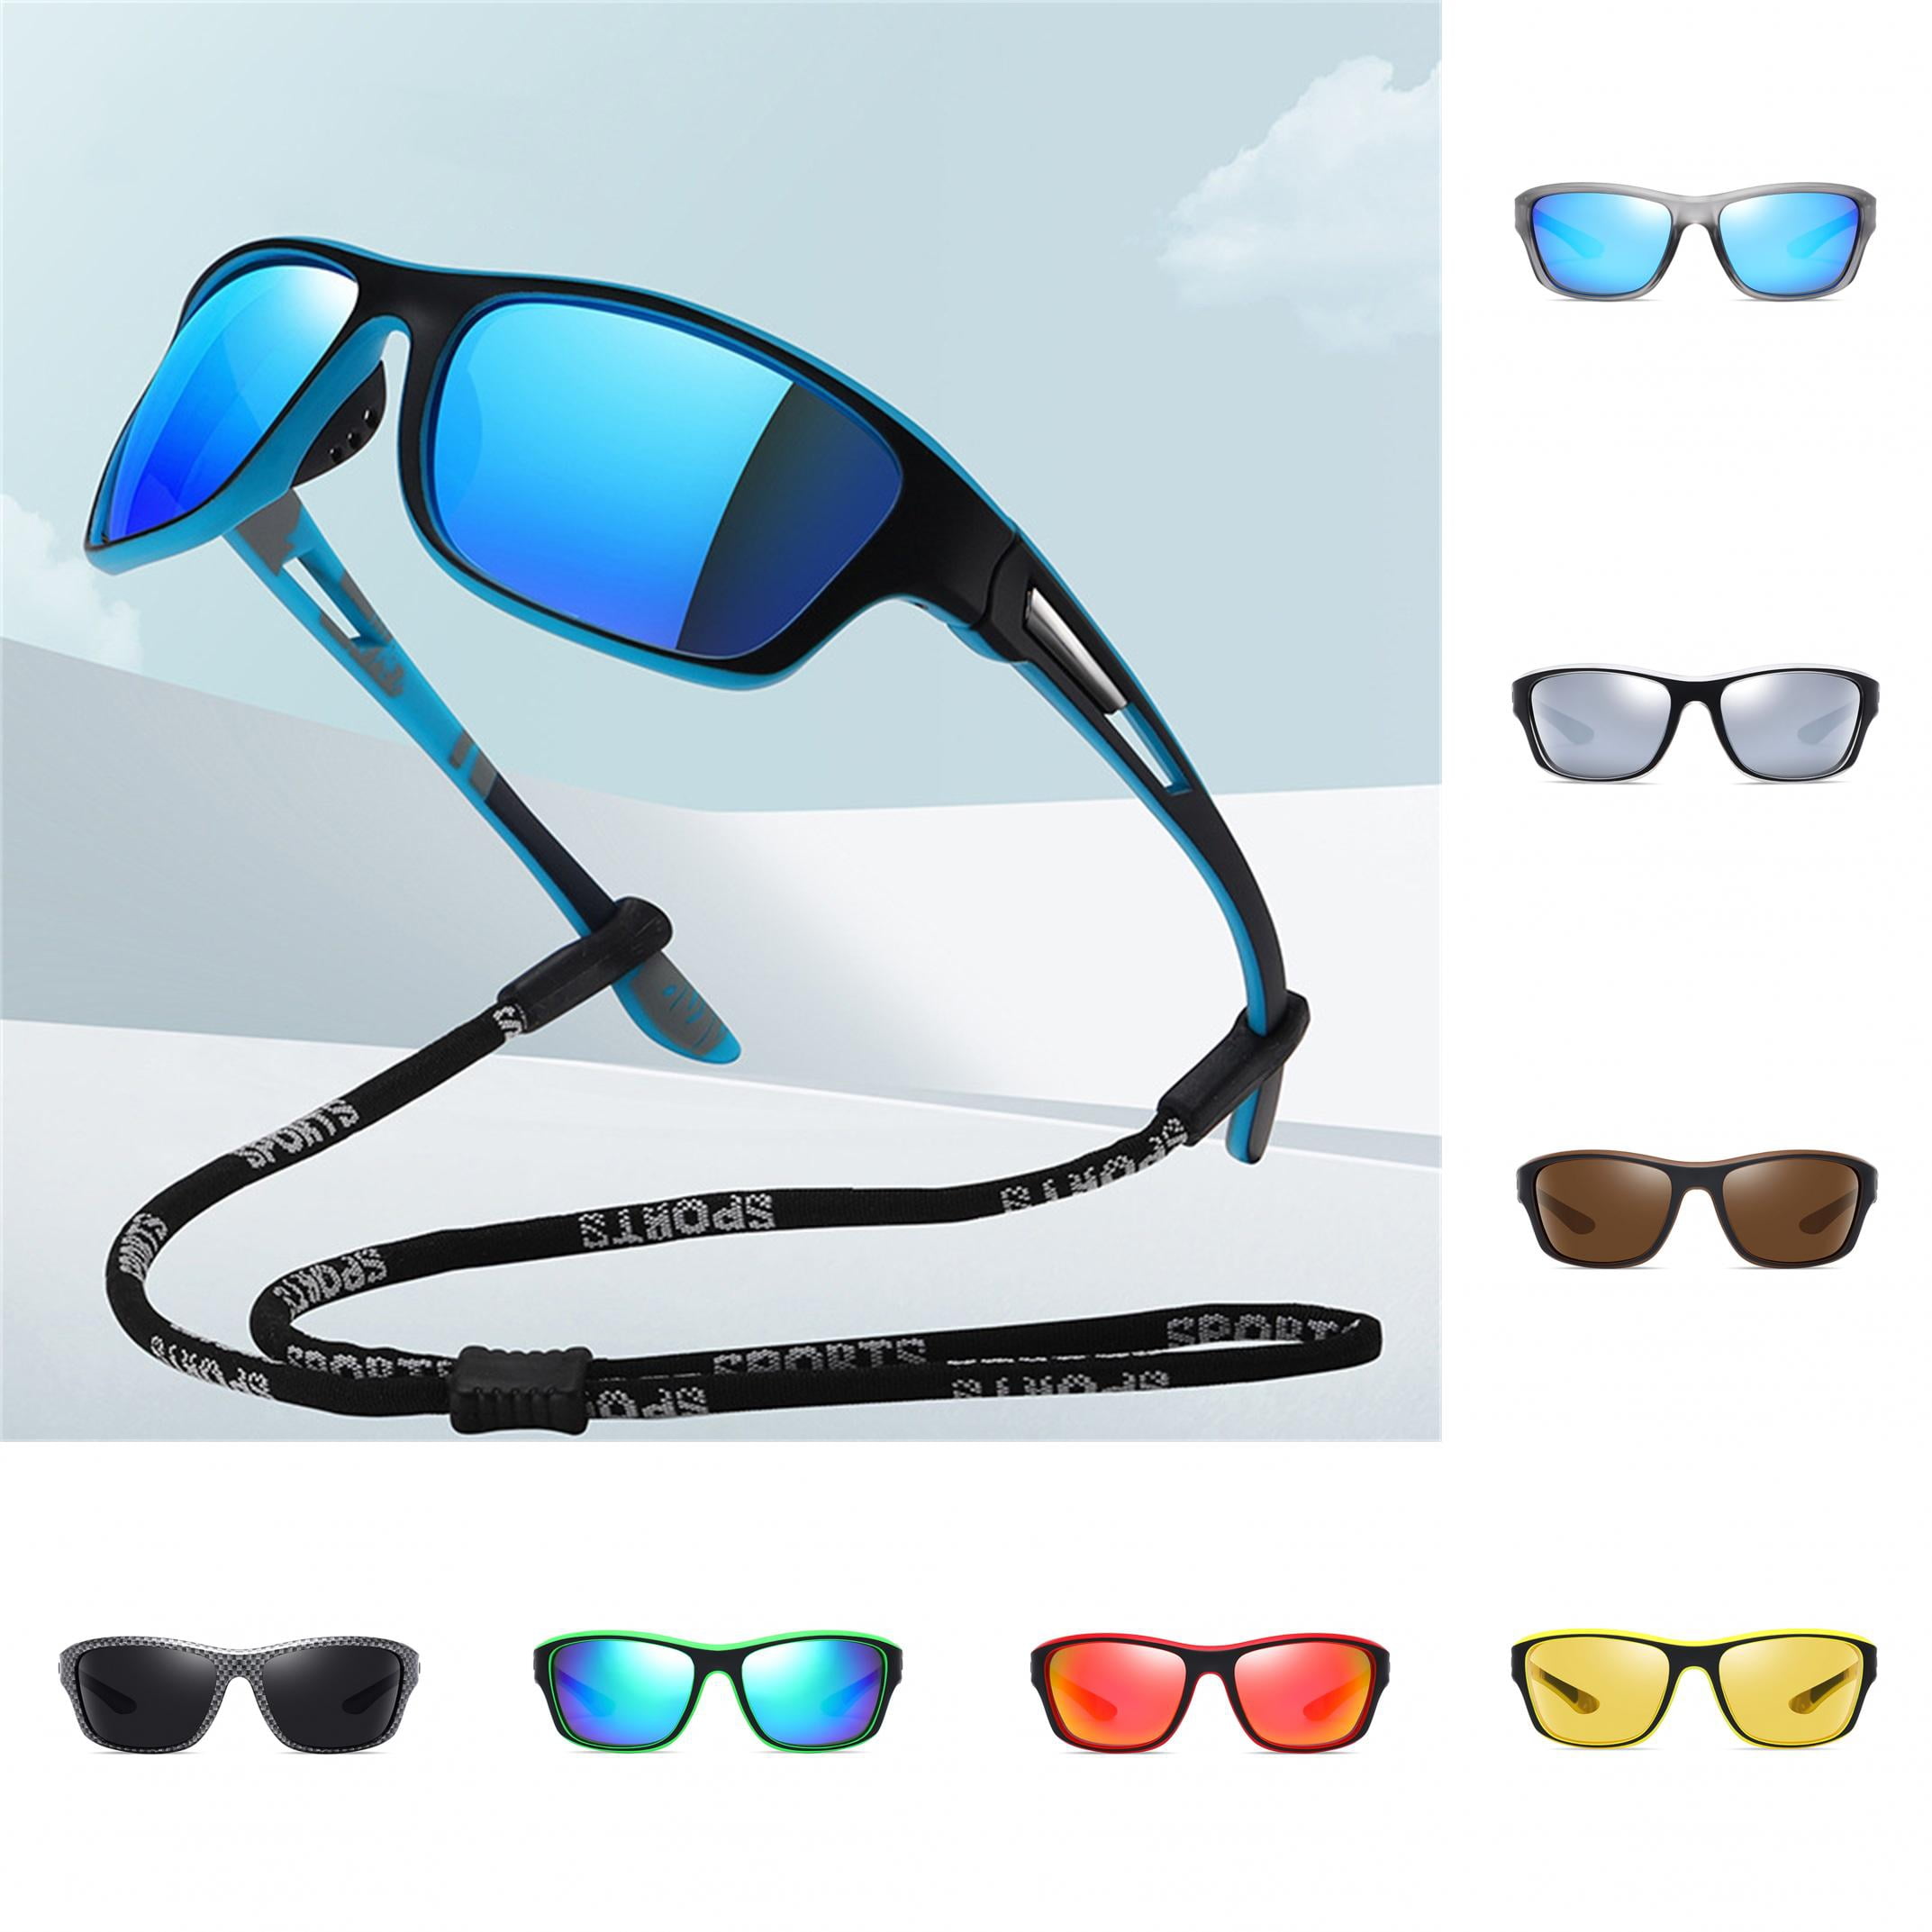 Polarized Outdoor Cycling Motorcycle Sun Glasses Safety Goggles UV Protection 